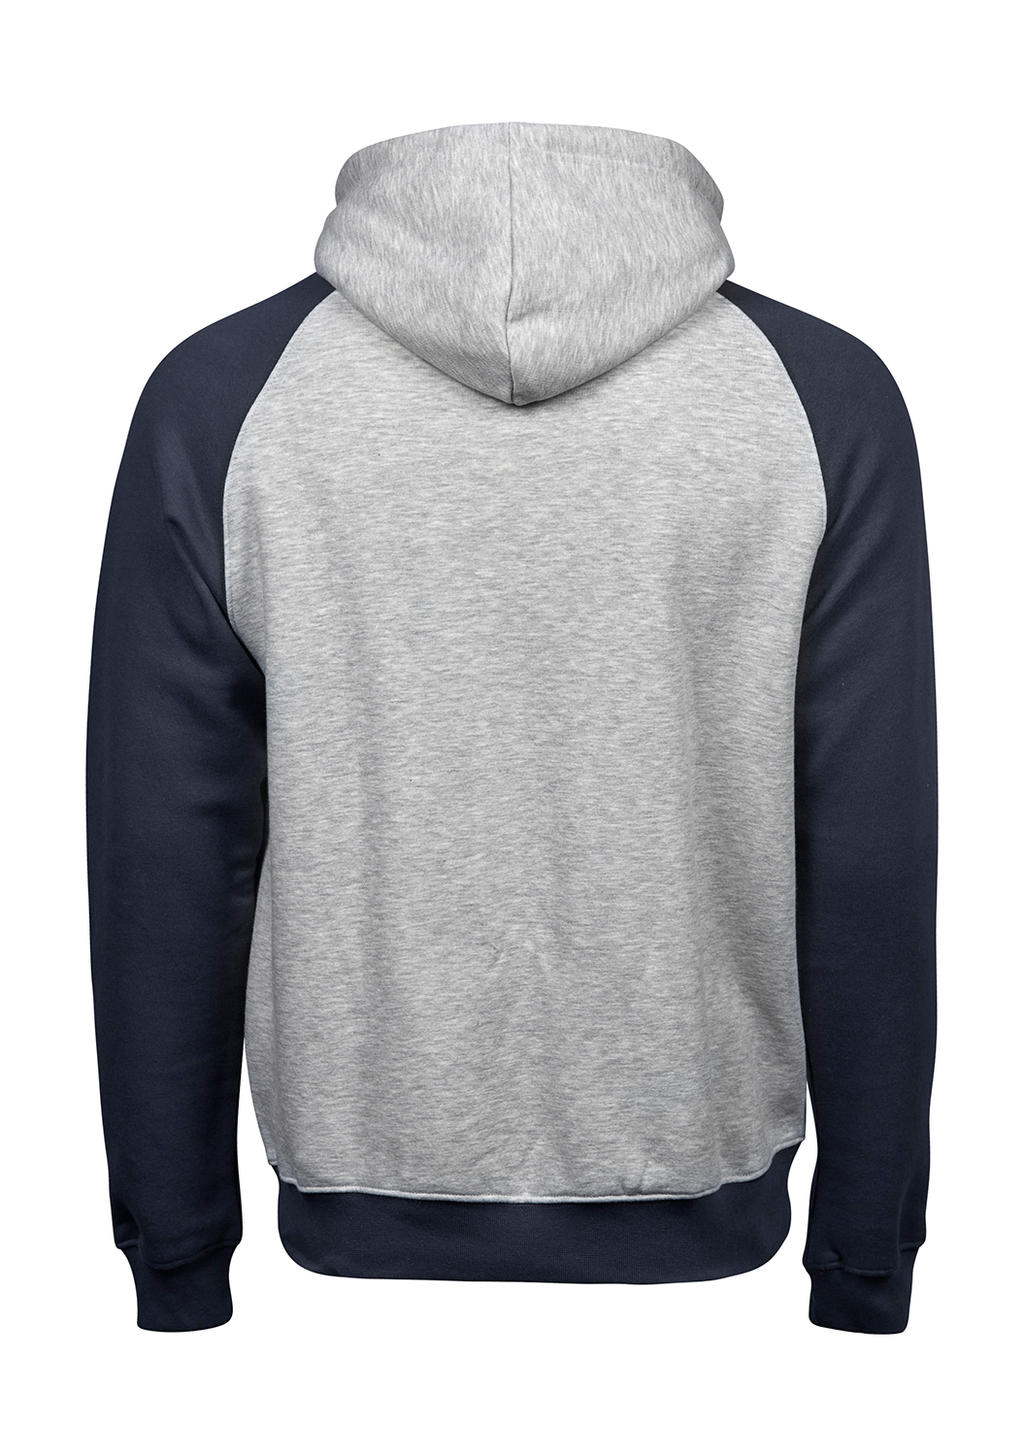  Two-Tone Hooded Sweatshirt in Farbe Heather/Navy